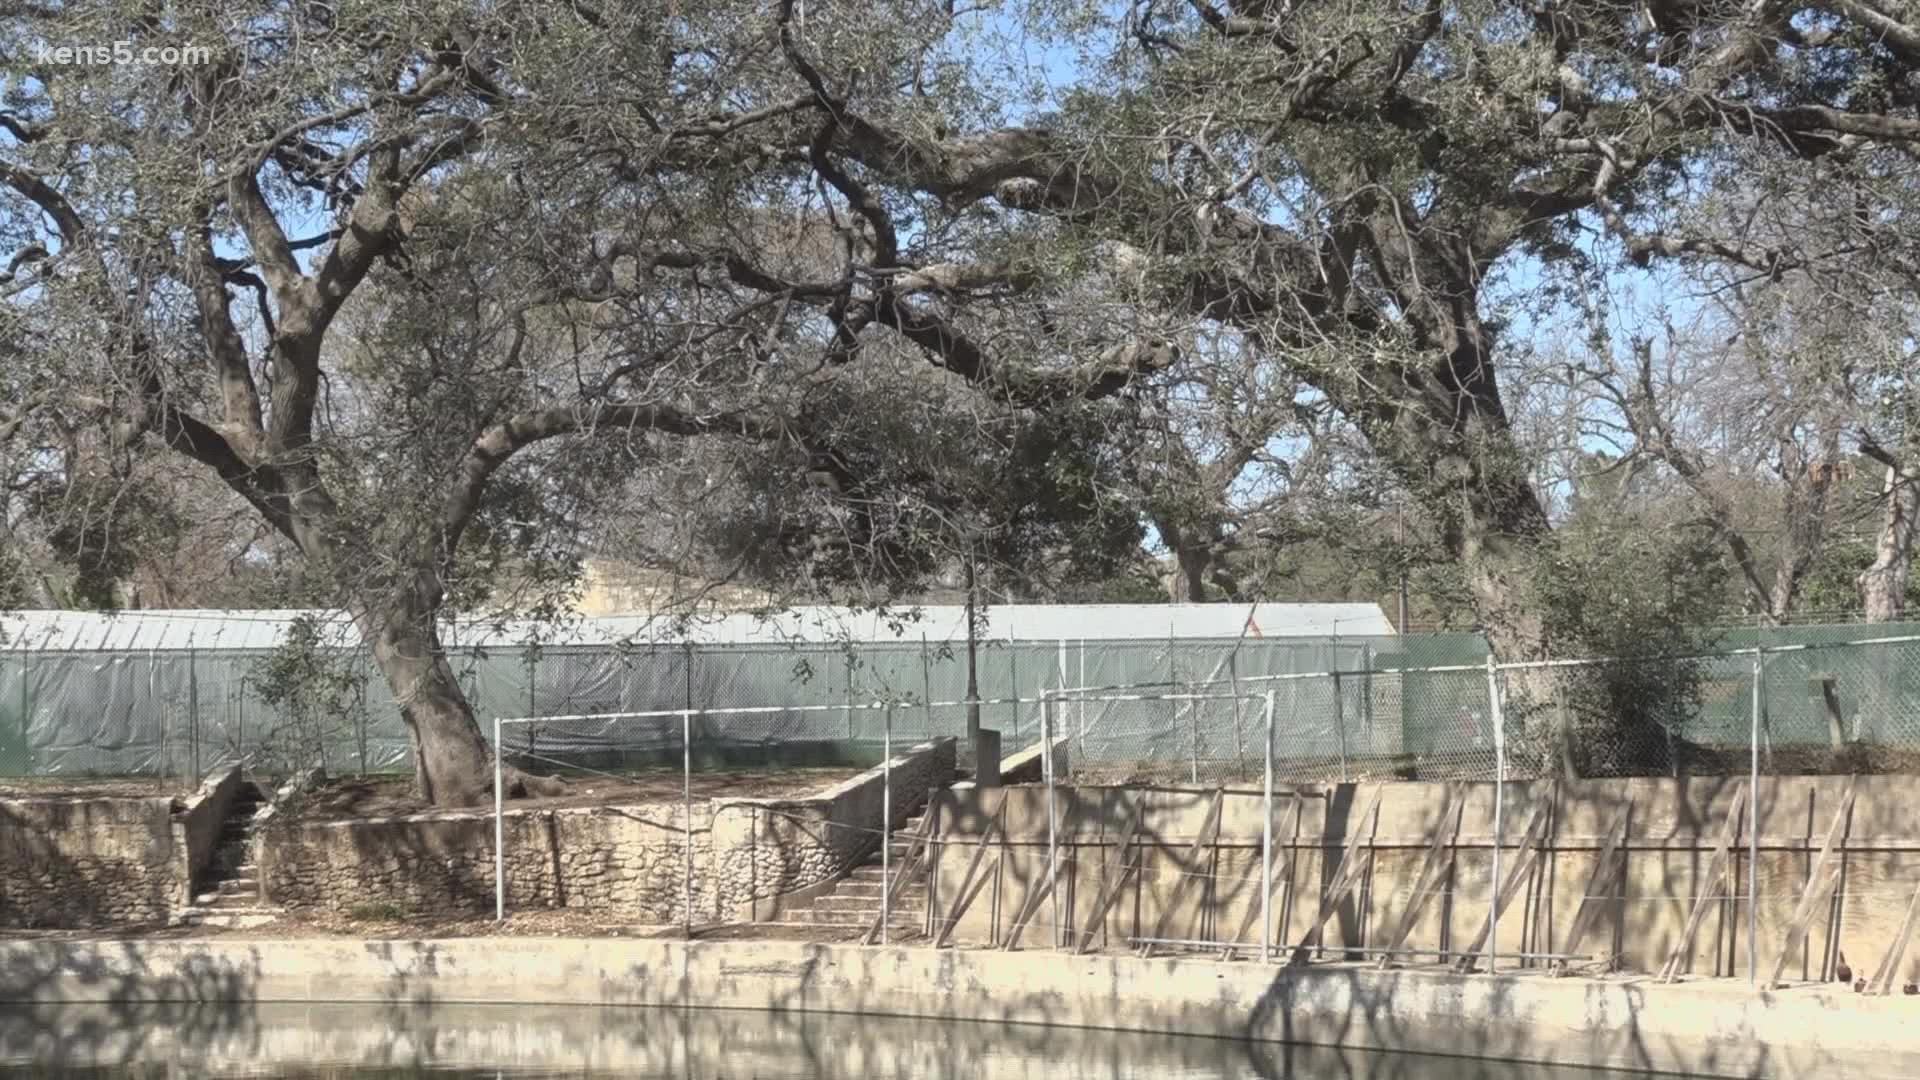 The proposed removal of over 100 trees at Brackenridge Park has ignited protests and is creating conversation among city officials.